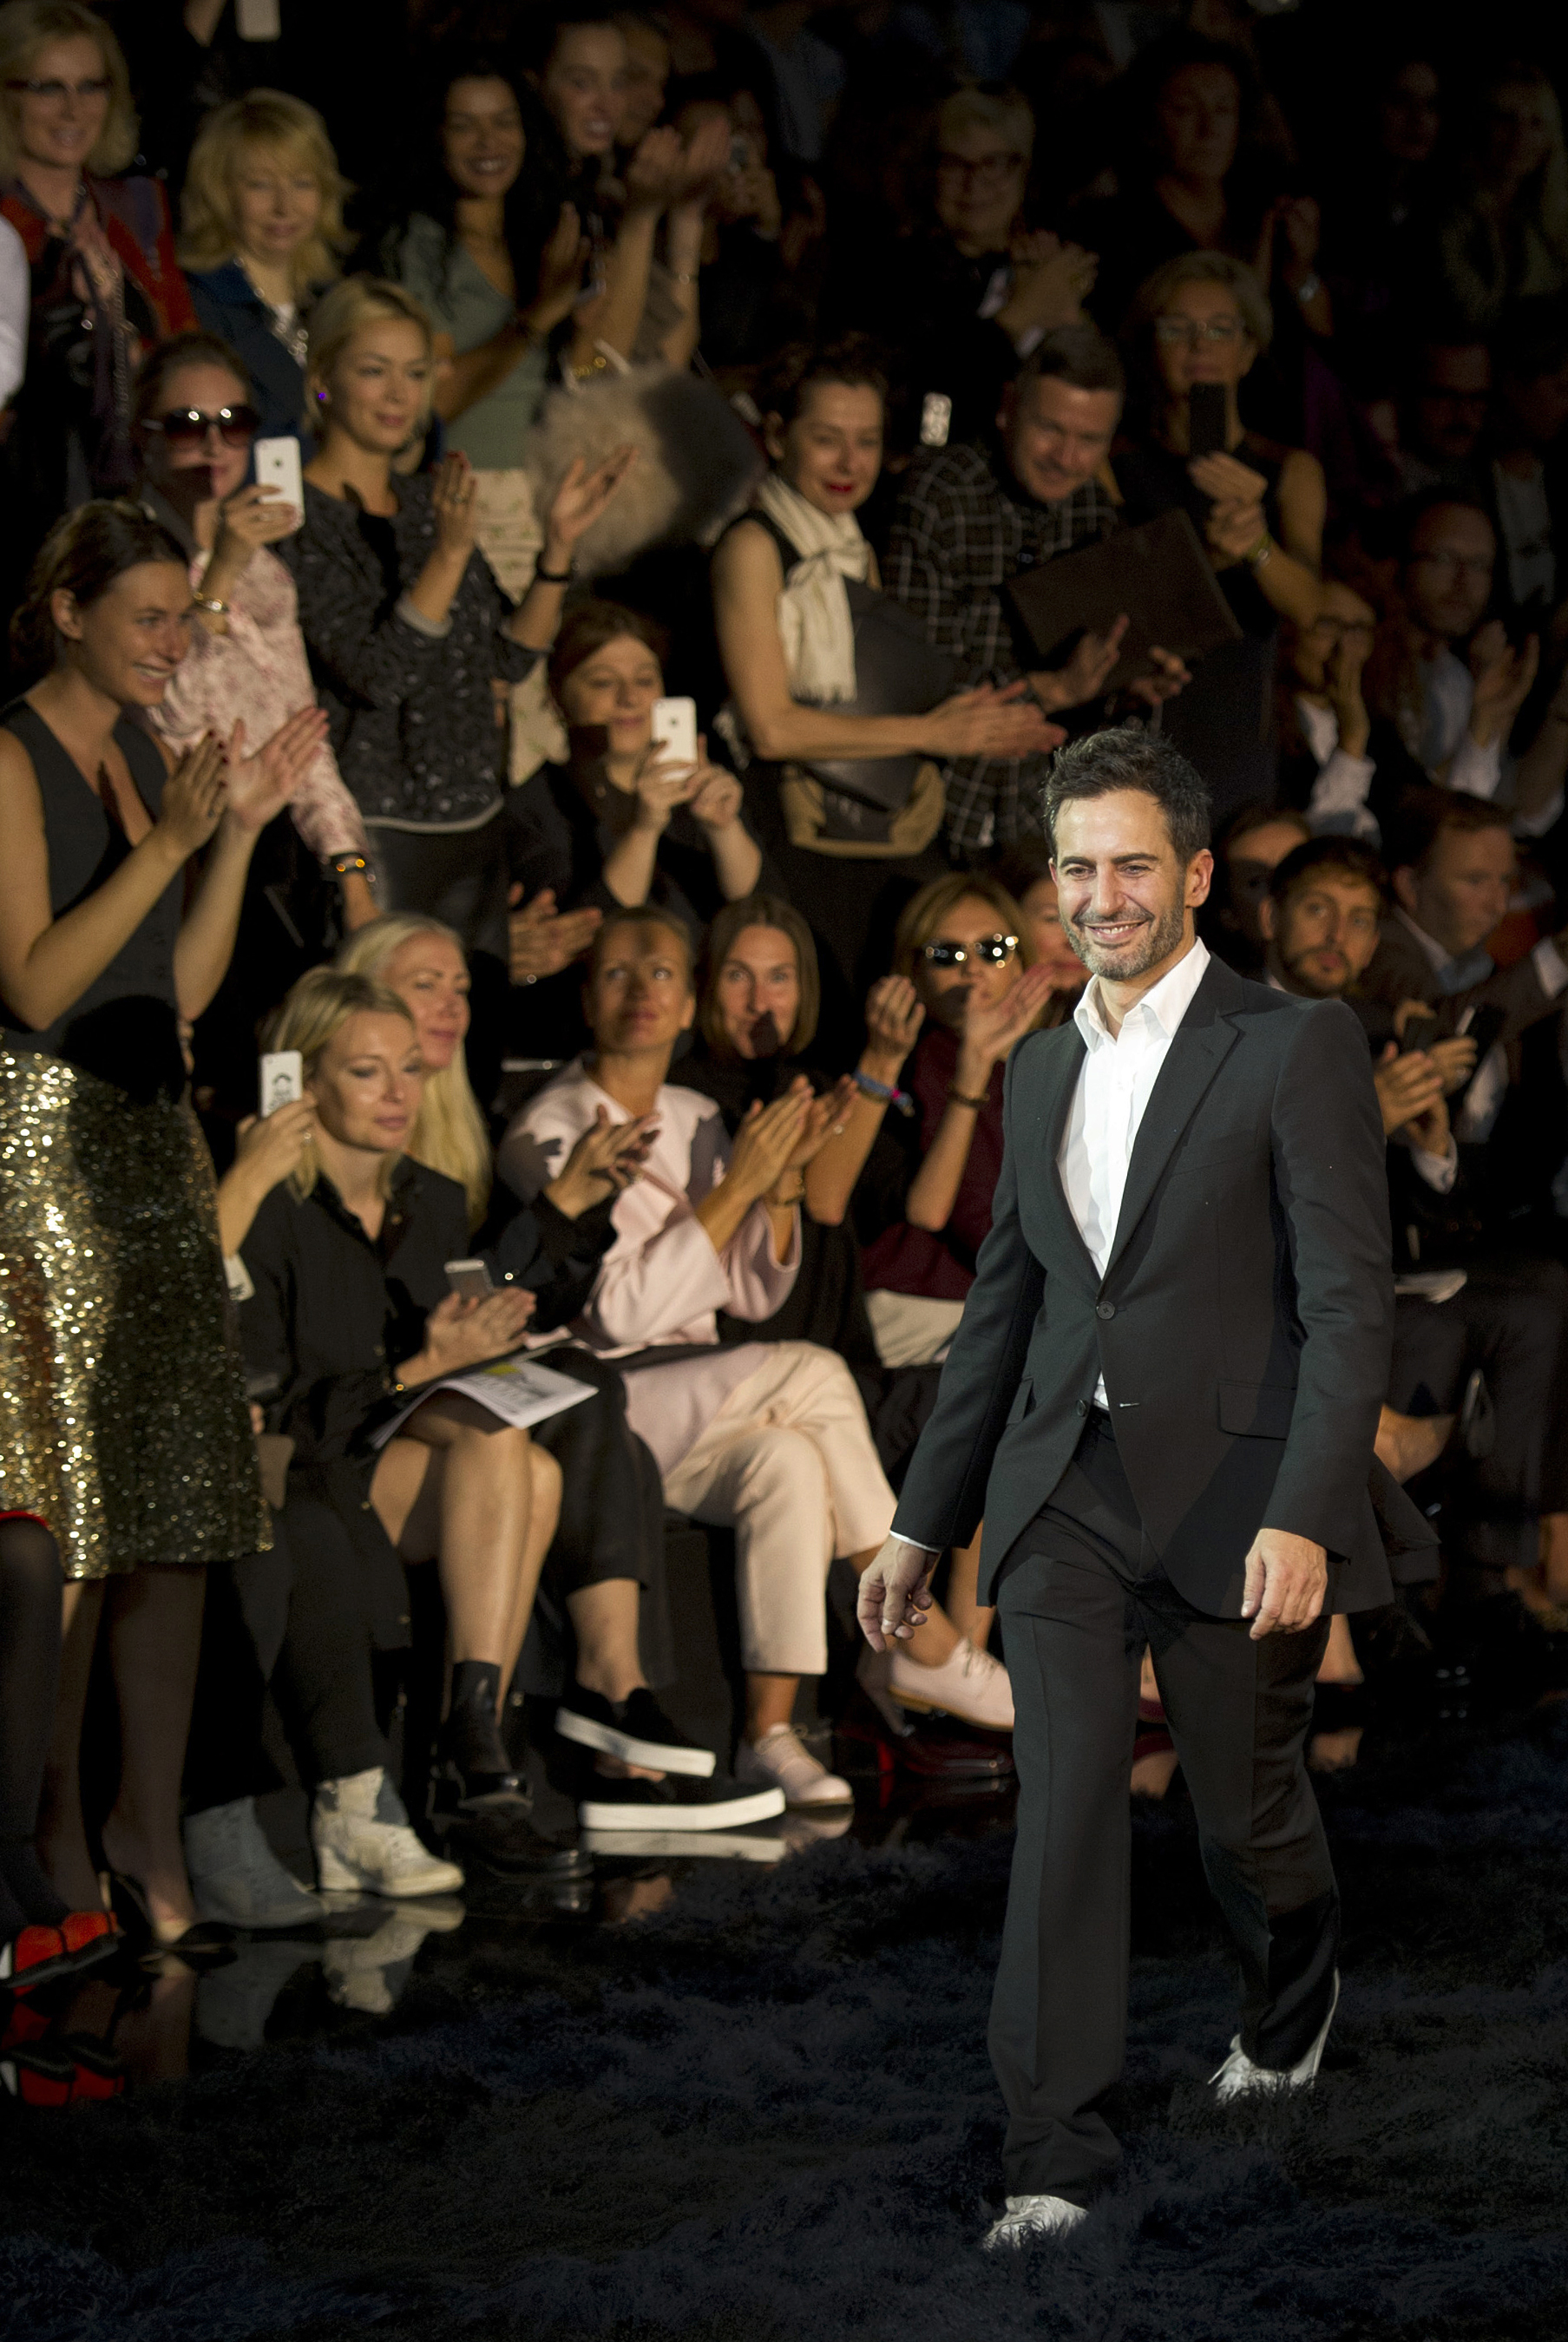 Marc Jacobs' star-studded farewell in final Louis Vuitton campaign